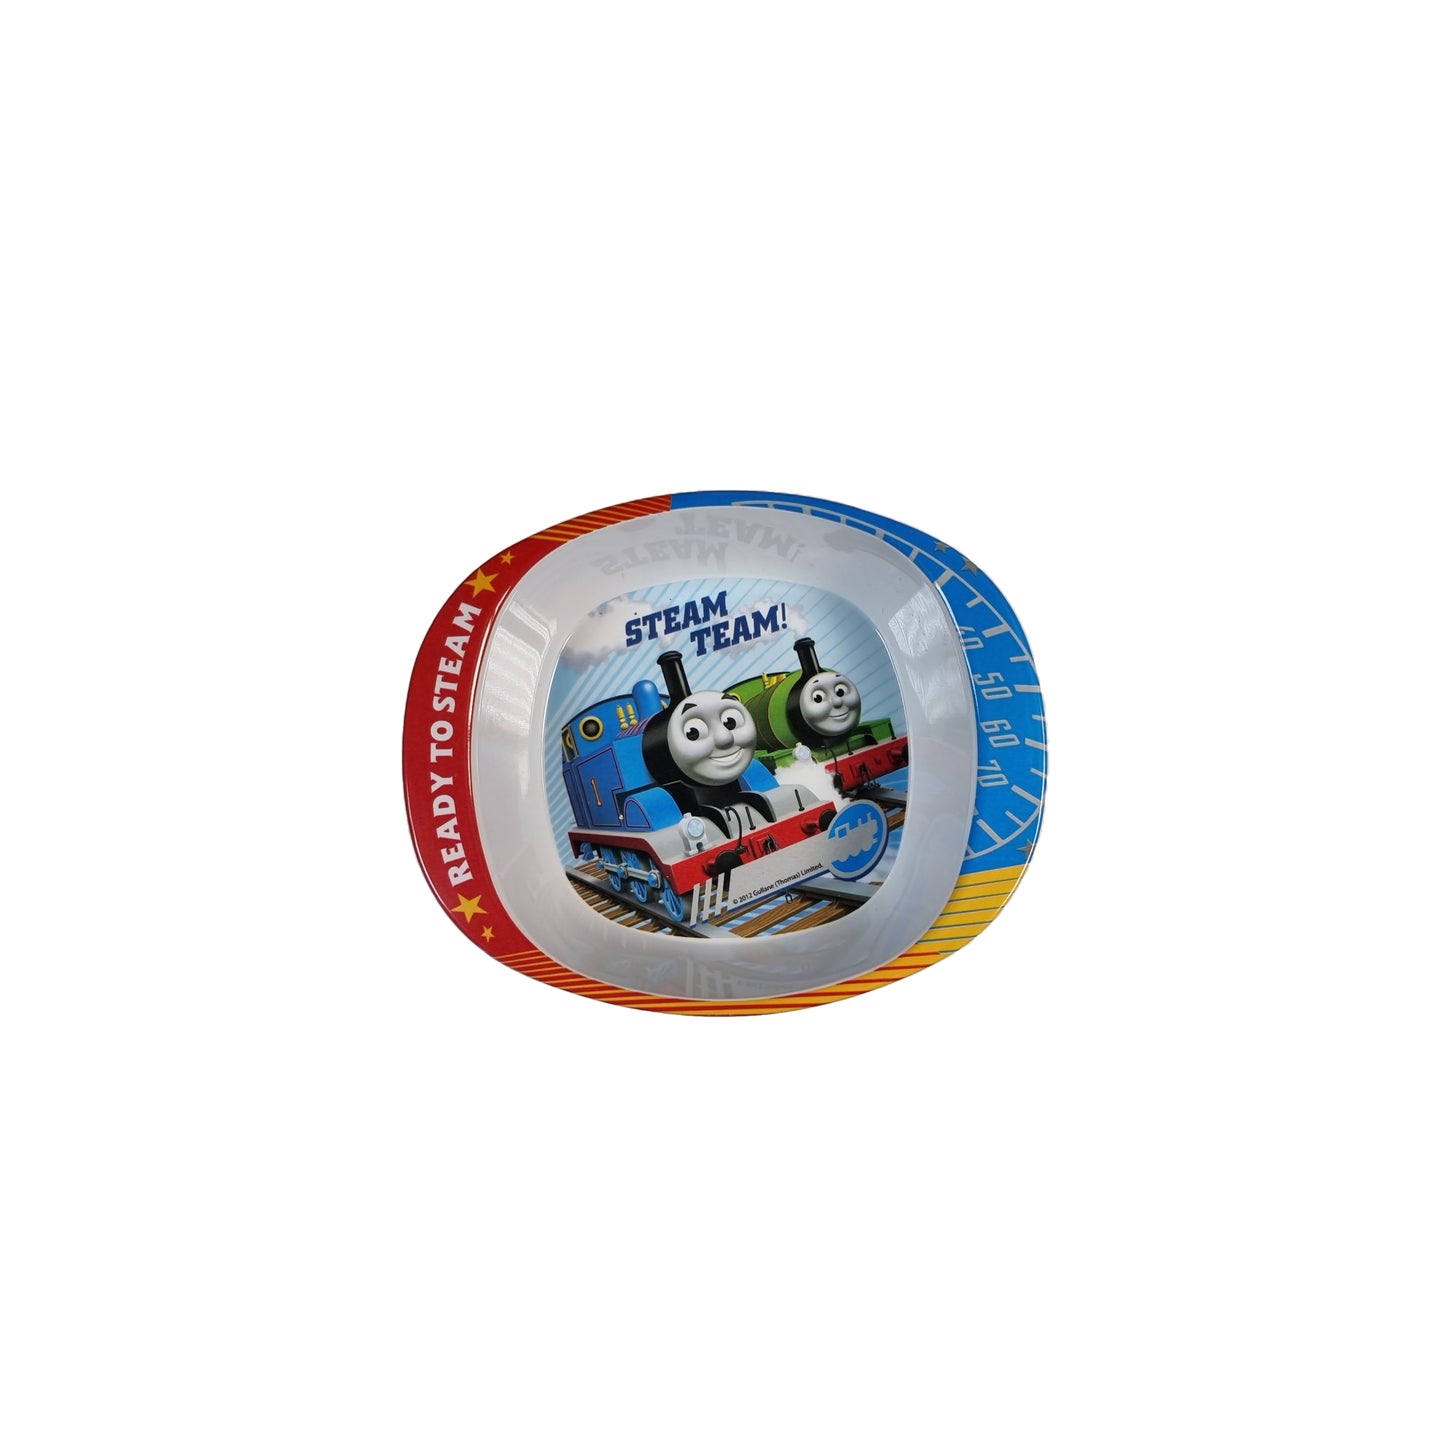 Thomas & Friends - Tableware, Bowl | Plate | Cup | Spoon | Fork (Steam Team Collection)